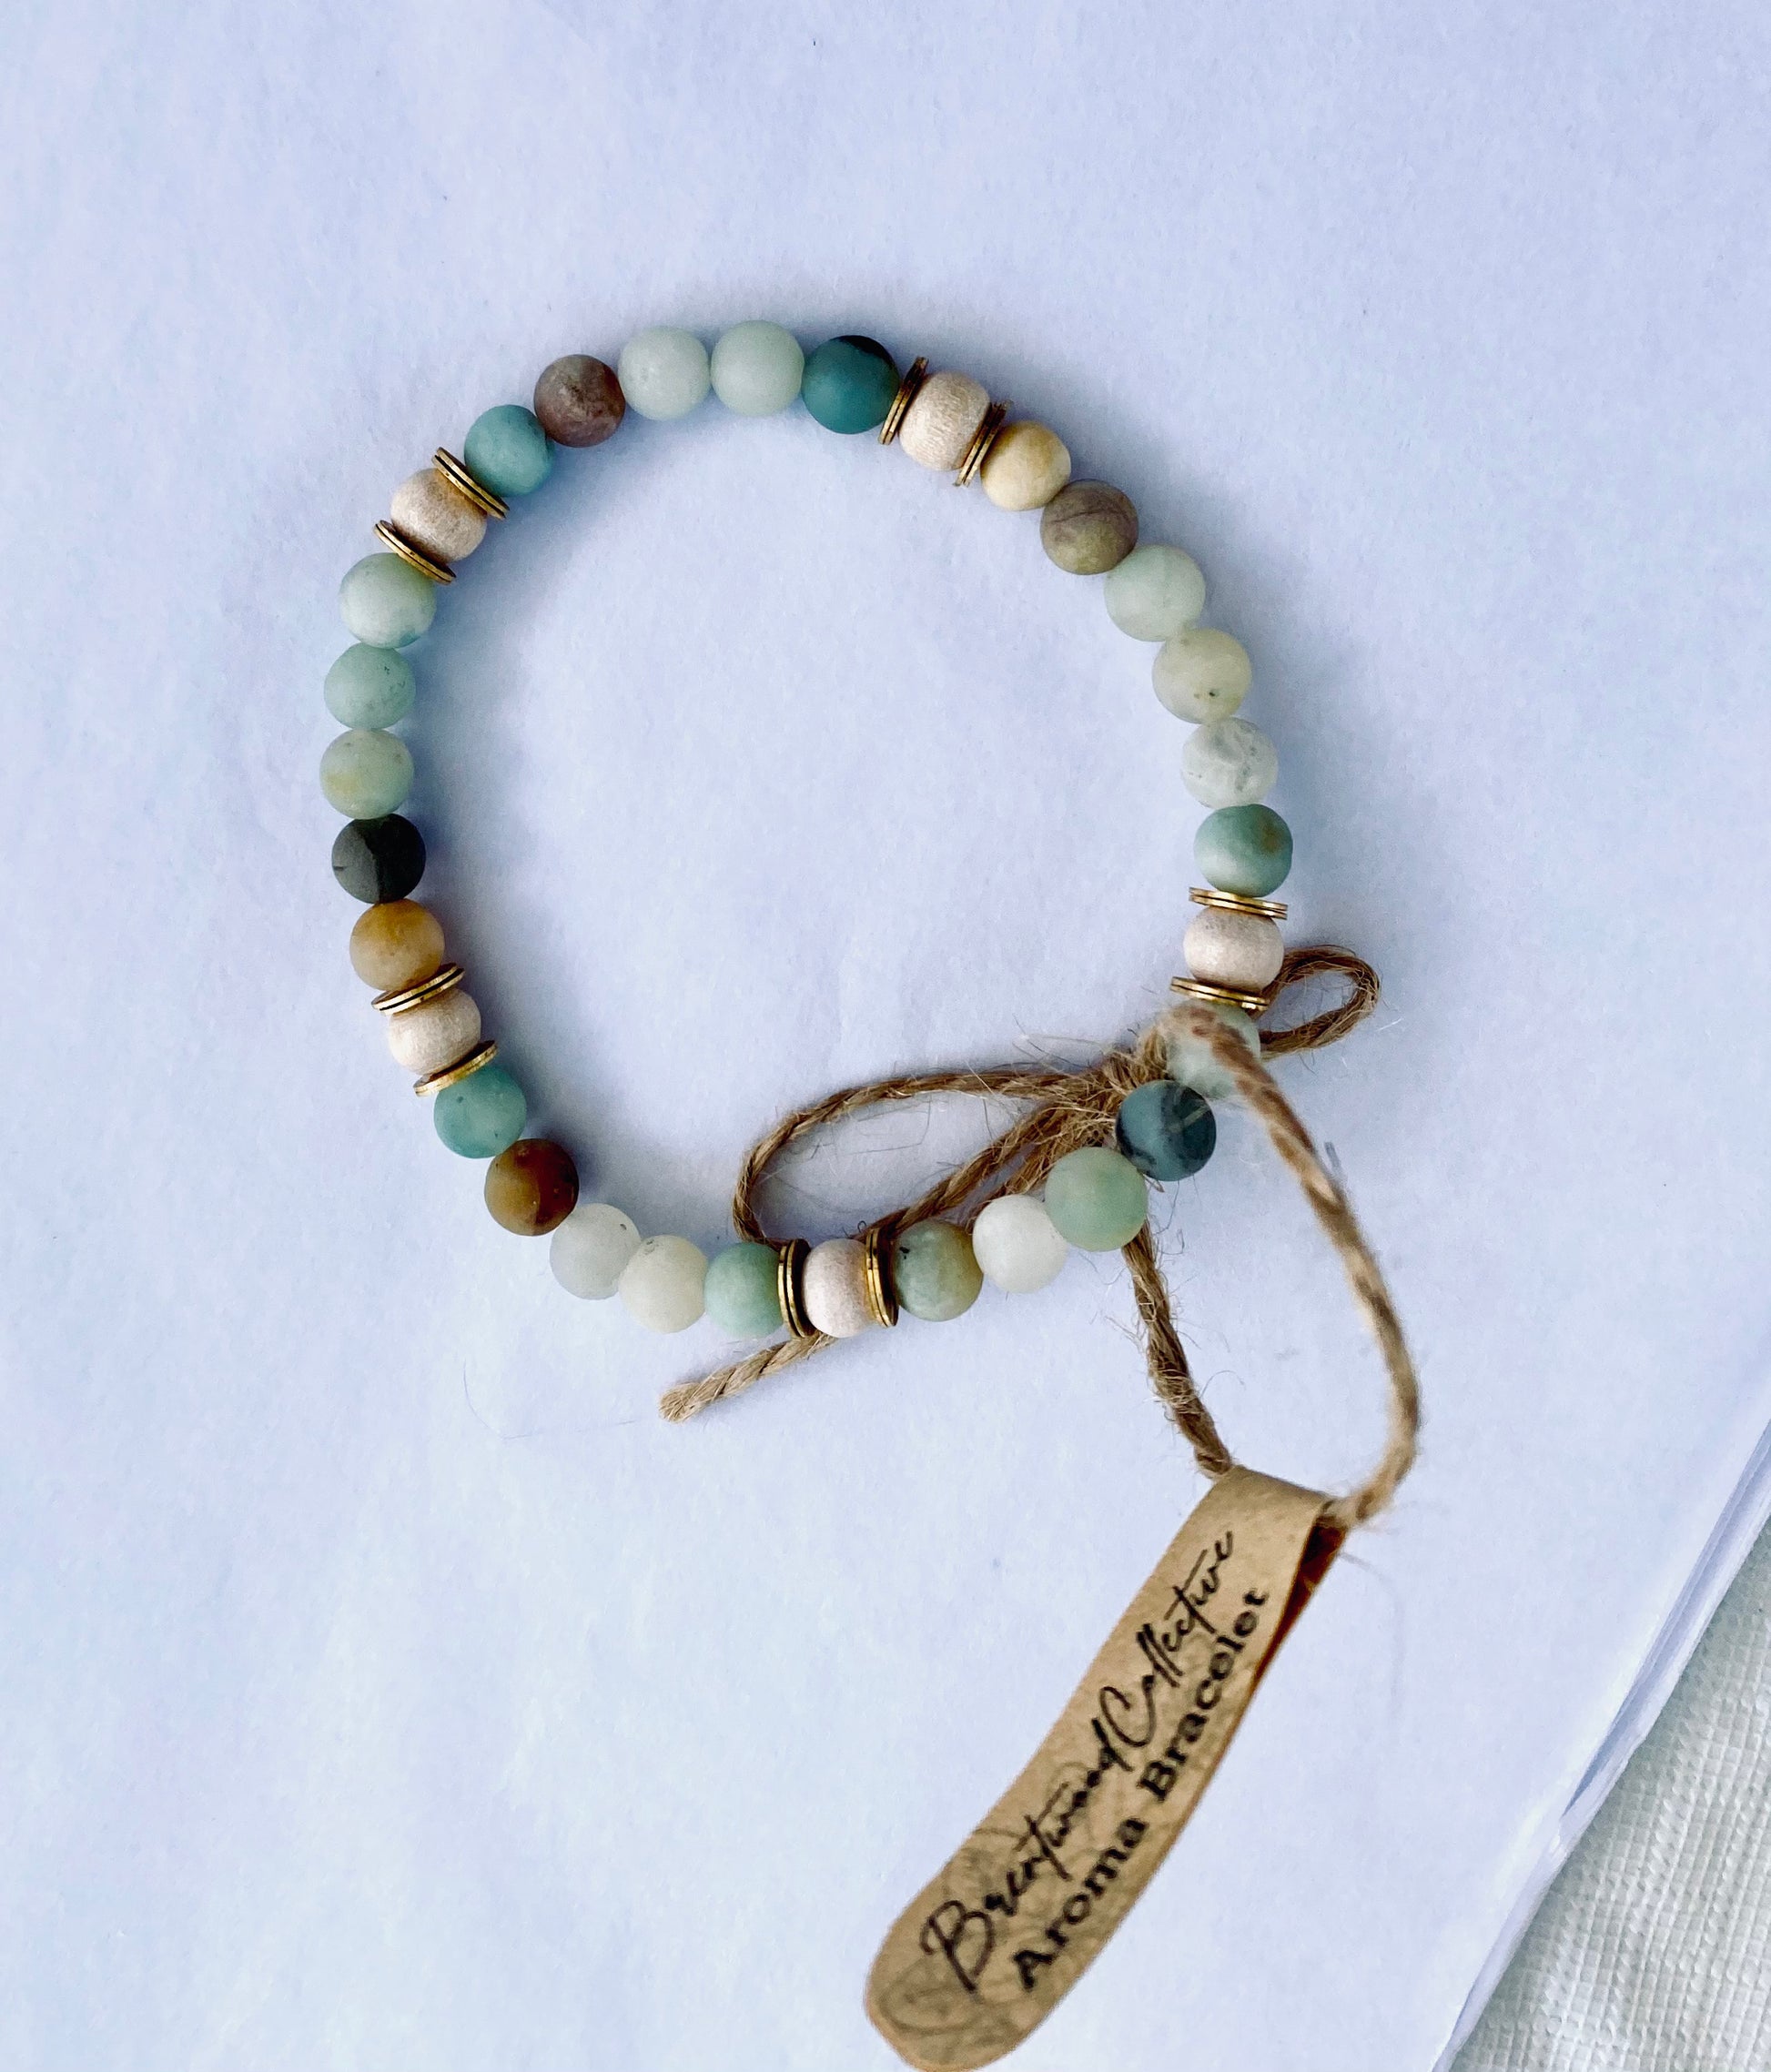 Single amazonite diffuser bracelet made from 6mm beads, with brass heishi disc embellishments and natural wood beads. Laid on white background with Kraft label tag.